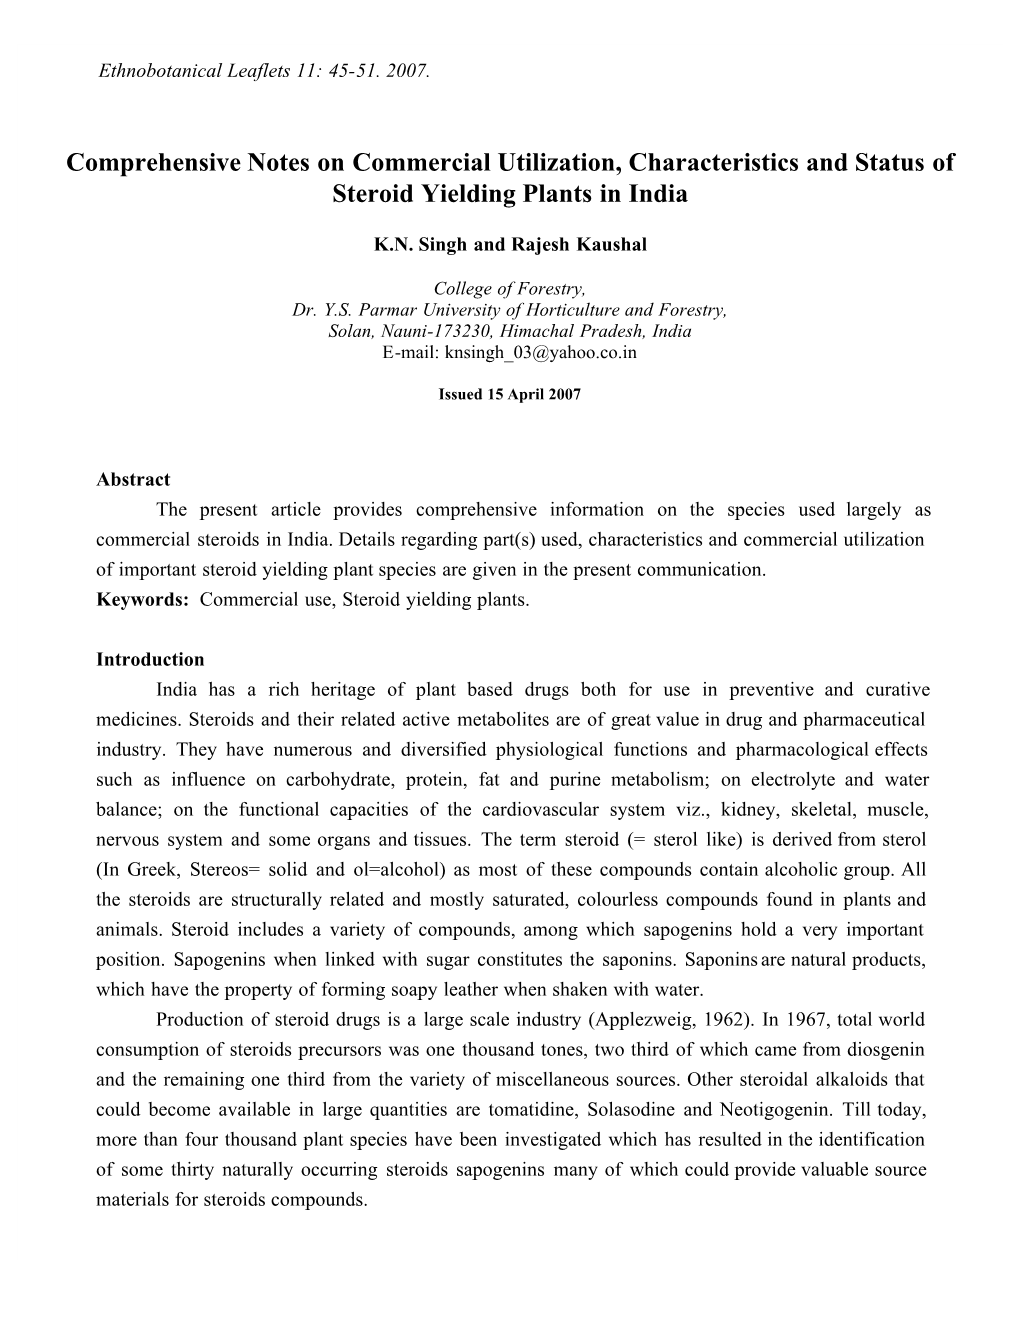 Comprehensive Notes on Commercial Utilization, Characteristics and Status of Steroid Yielding Plants in India